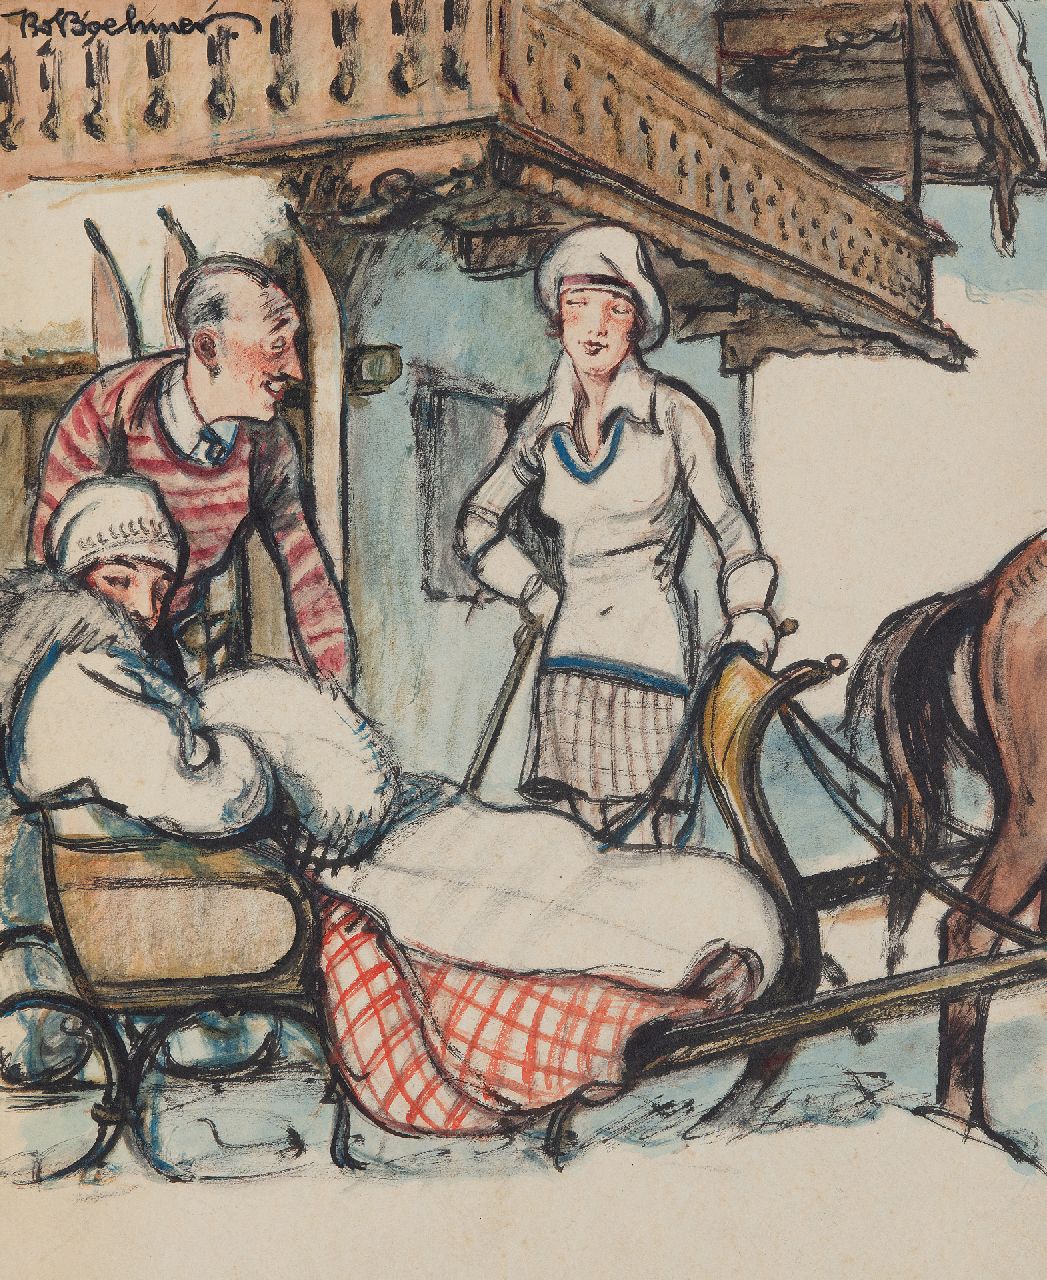 Boehmer K.W.  | Karl Wolfgang Boehmer | Watercolours and drawings offered for sale | With the sleigh, watercolour and gouache on paper 39.7 x 32.8 cm, signed u.l. and without frame